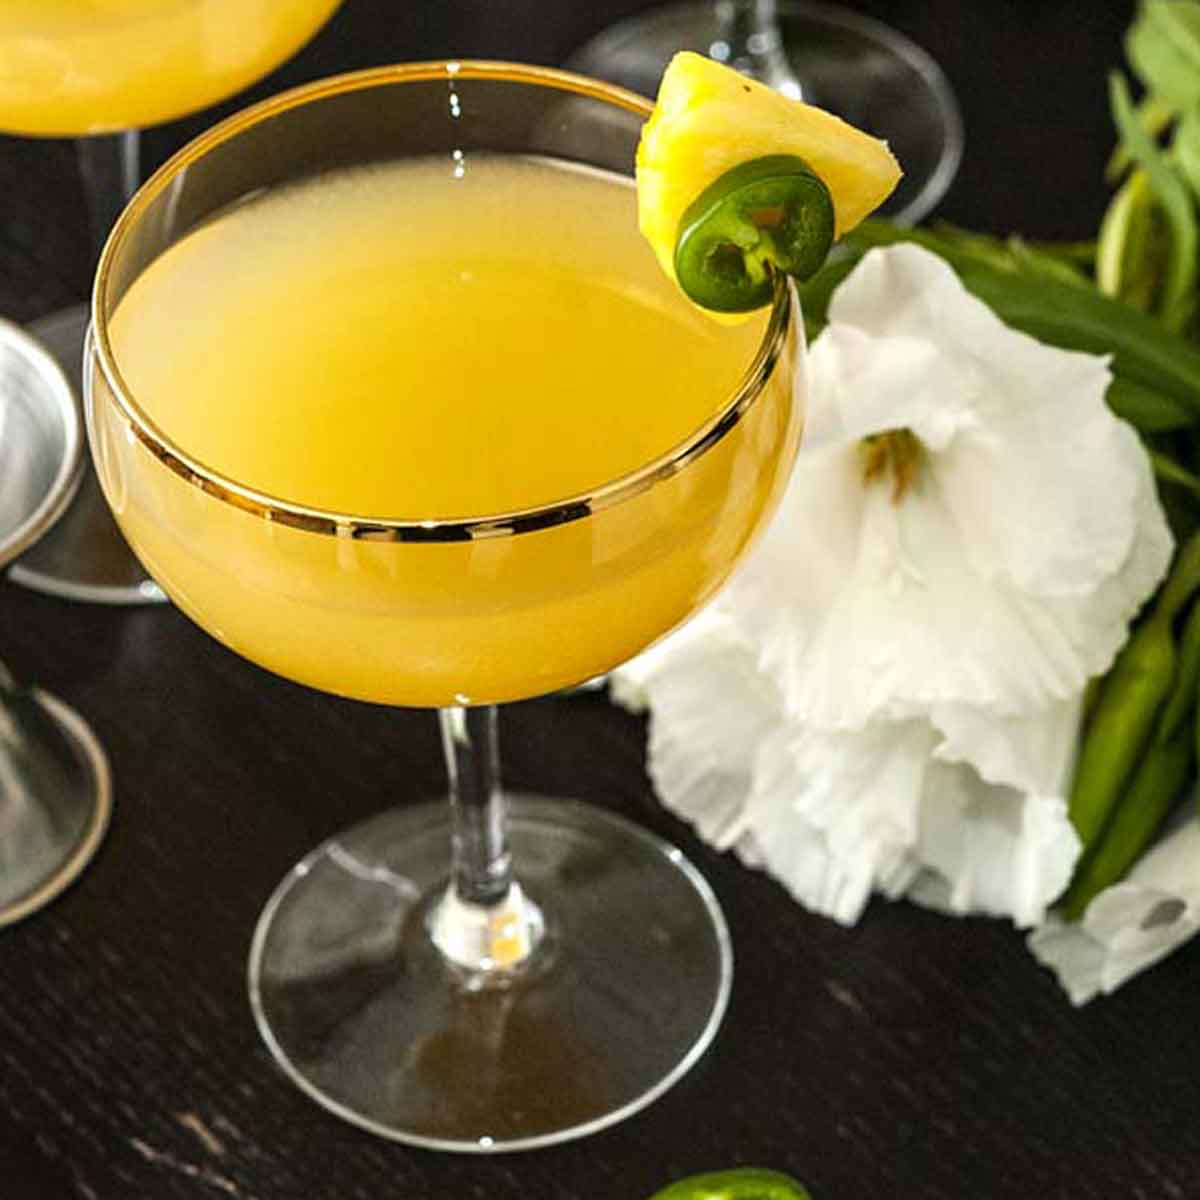 A pineapple cocktail on a table, garnished with pineapple and jalapeño, with tropical flowers in the background.